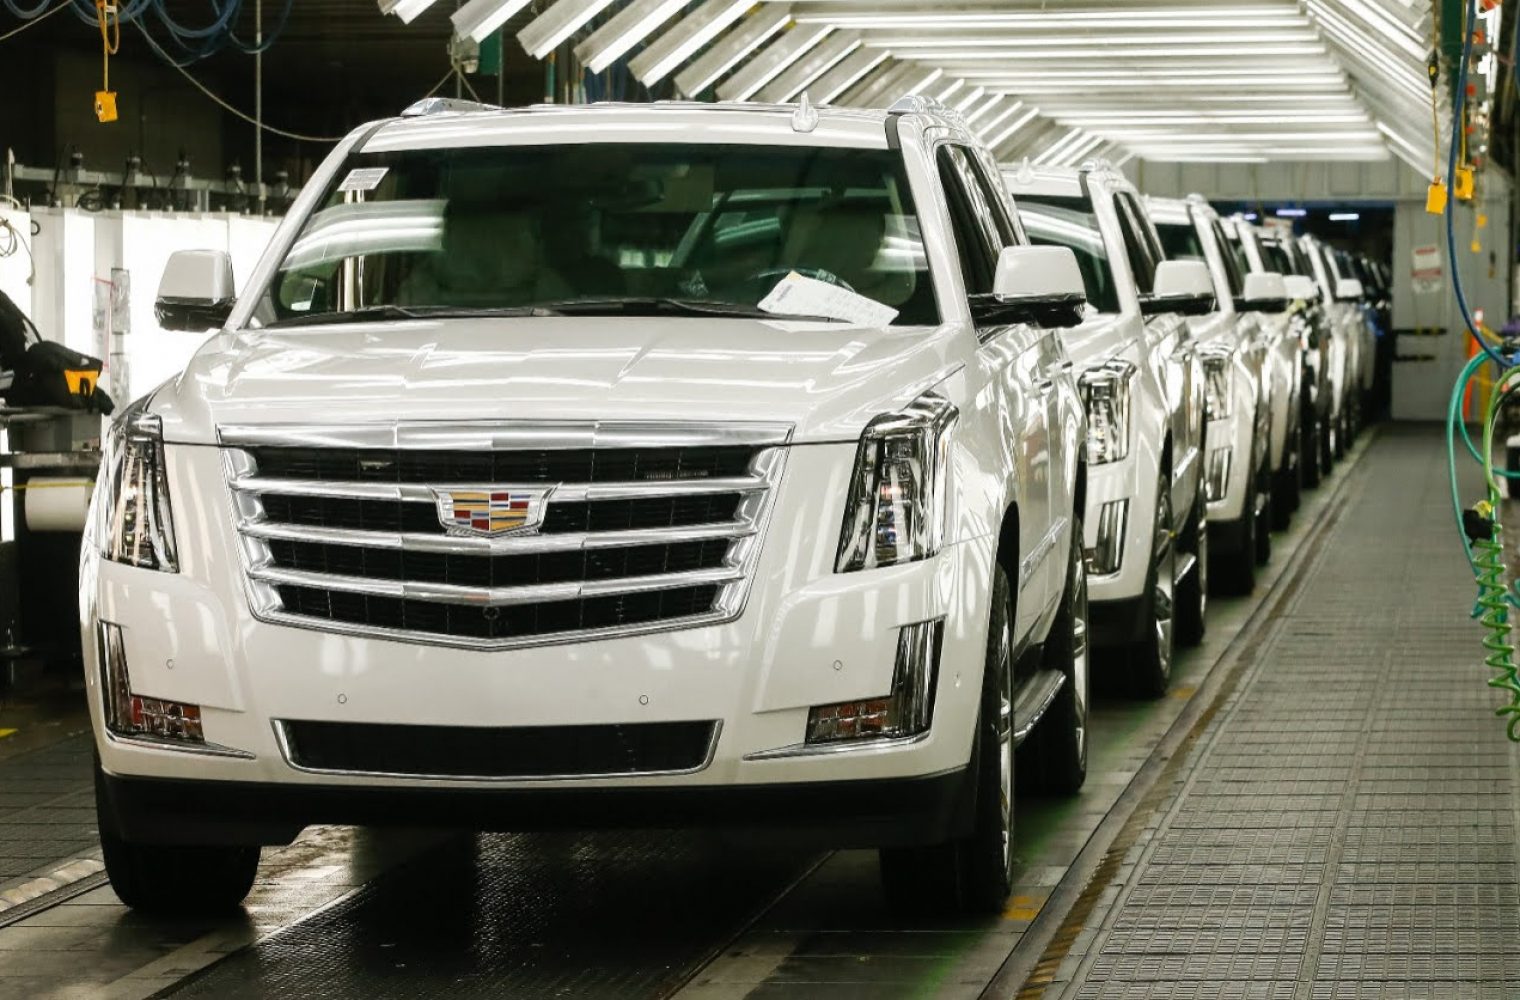 Cadillac Escalade Rebate Offers 9 500 Cash During January 2021